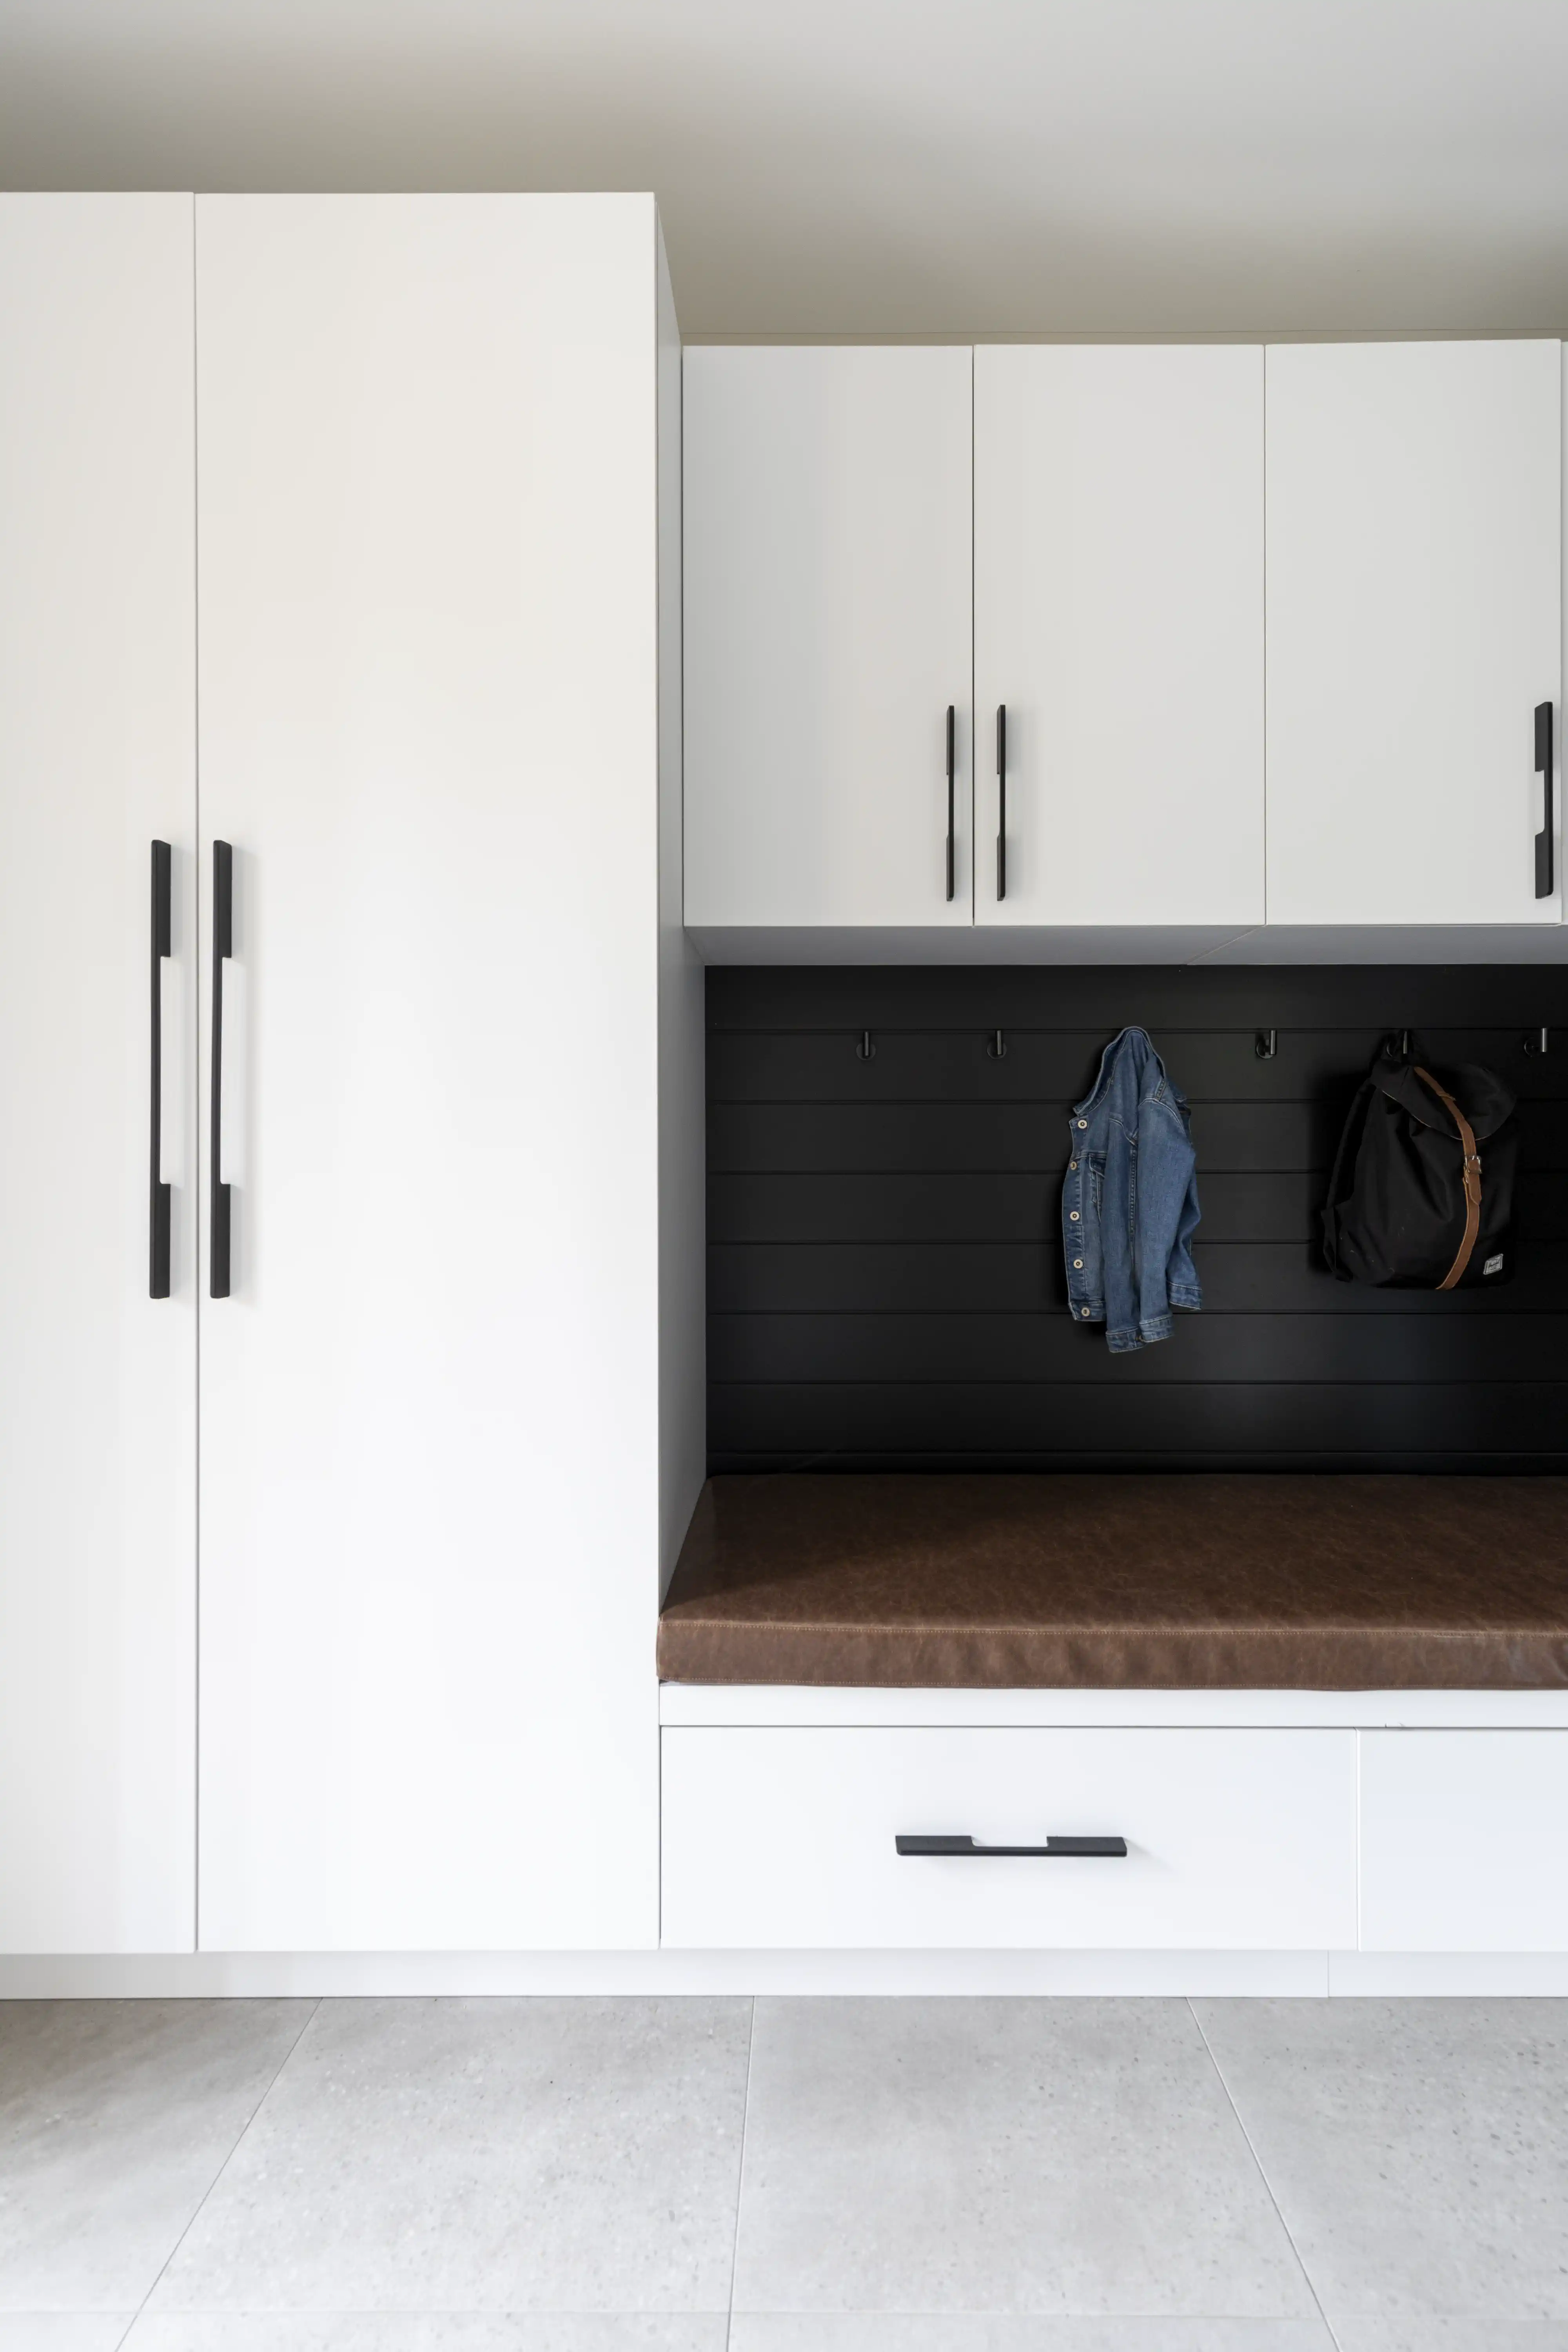 A modern, minimalist entryway with a built-in closet and bench, interior by Sarah Brown Design